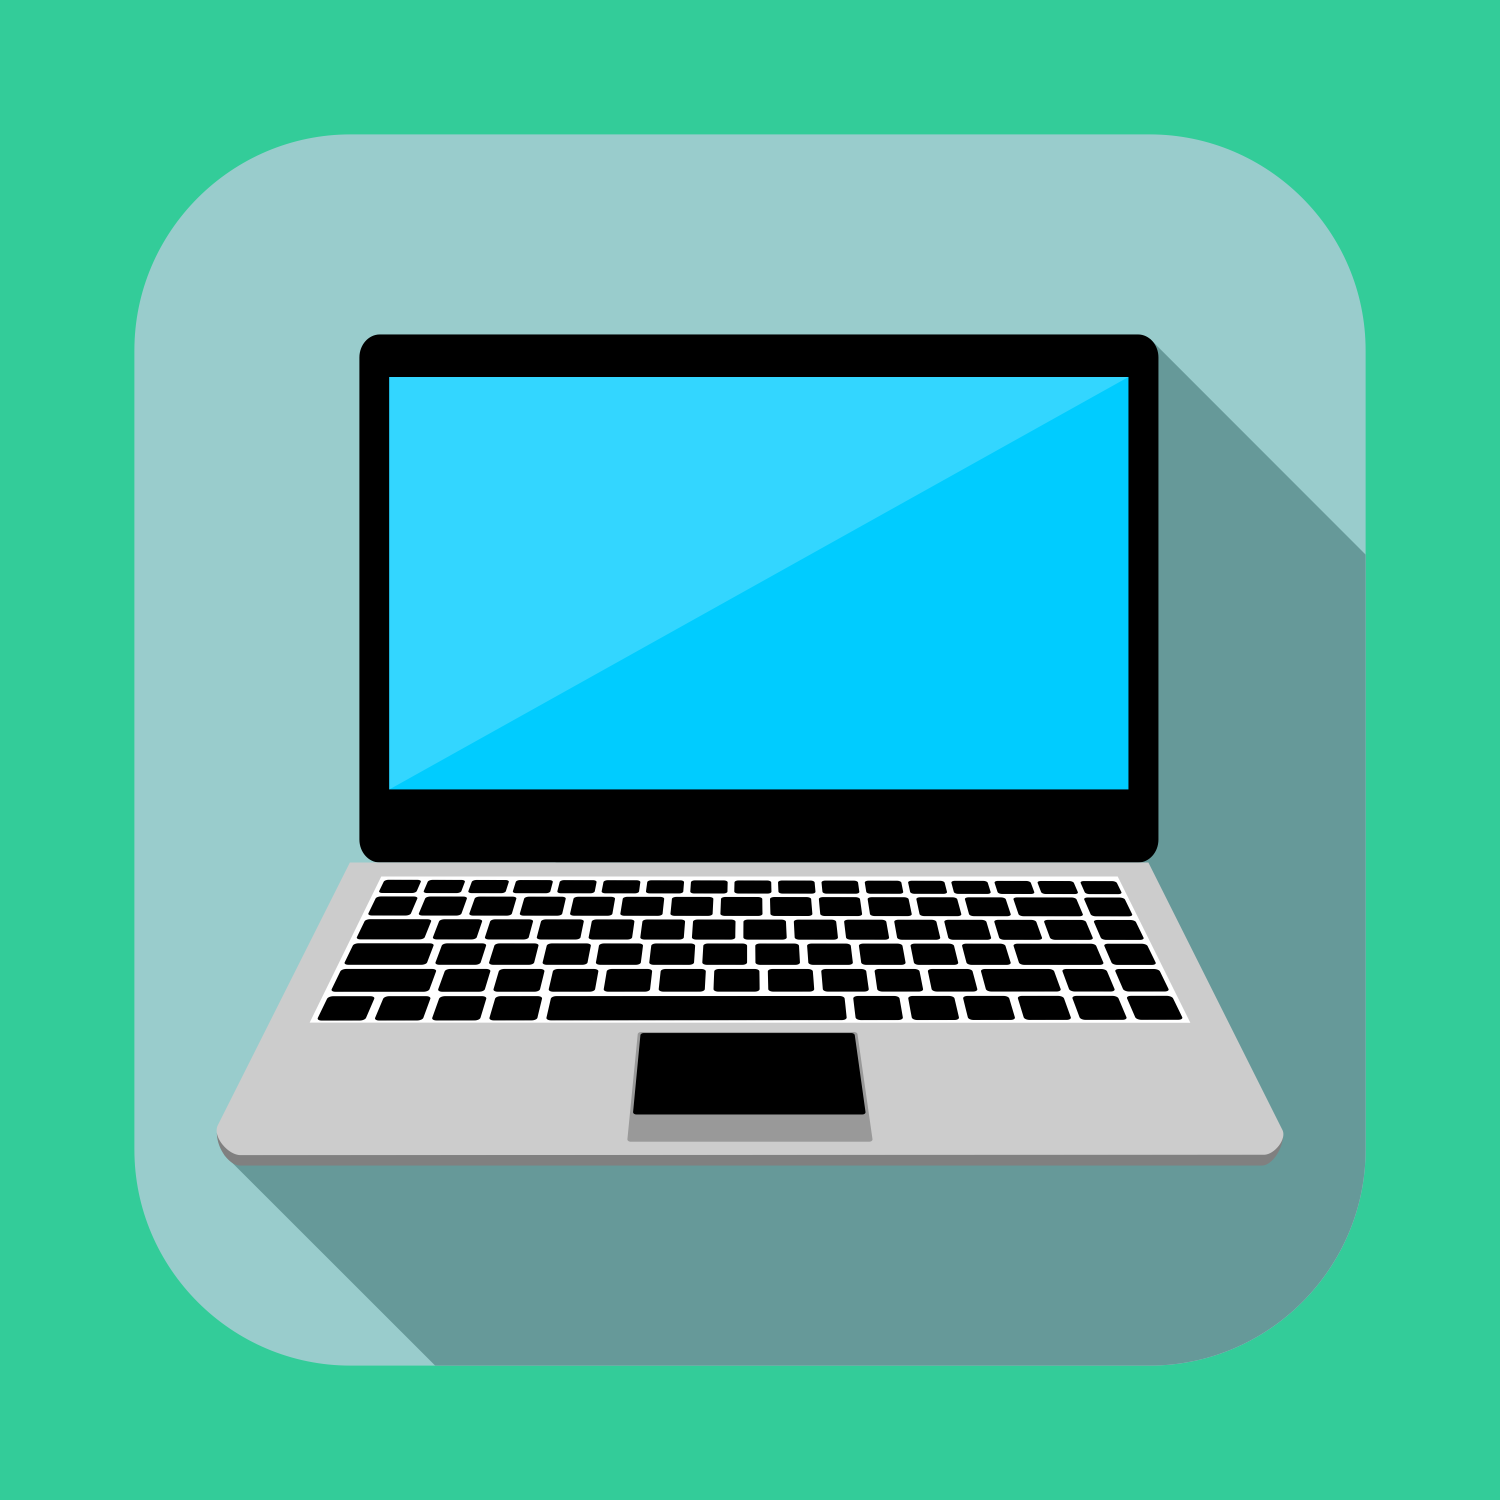 Download Vector for free use: Flat laptop icon